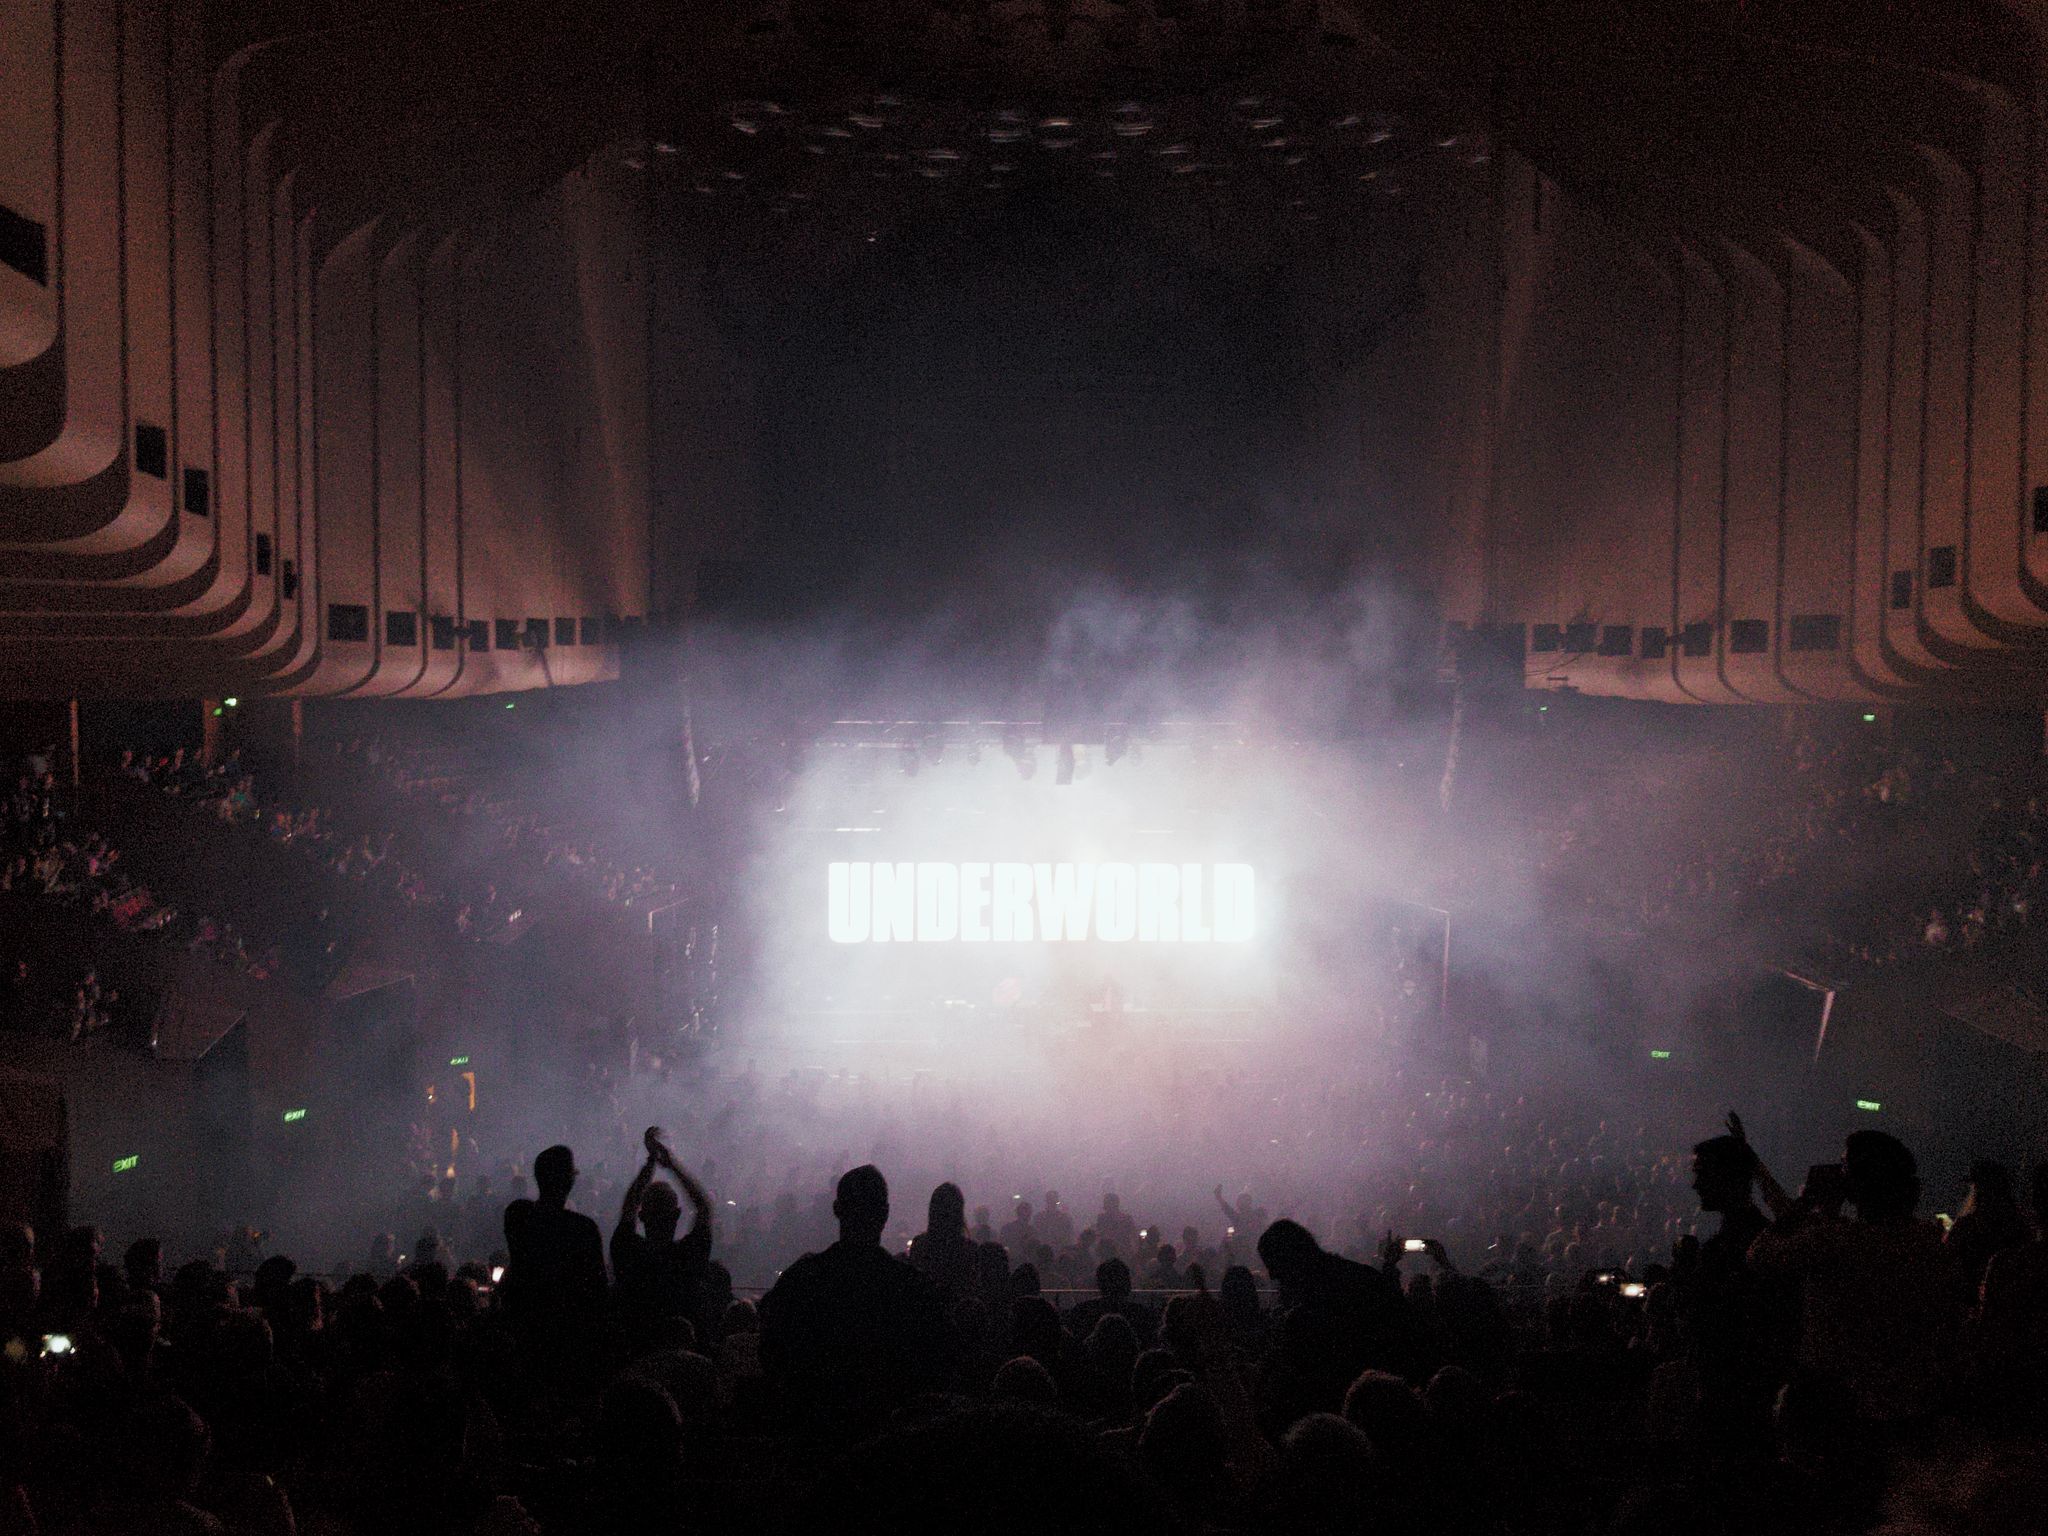 Looking down from seating inside the Opera House towards the stage, everything is hazy from smoke machines and the back of the stage has "UNDERWORLD" projected onto it in giant white letters. Silhouettes of the crowd cheering can be seen in the smoke.